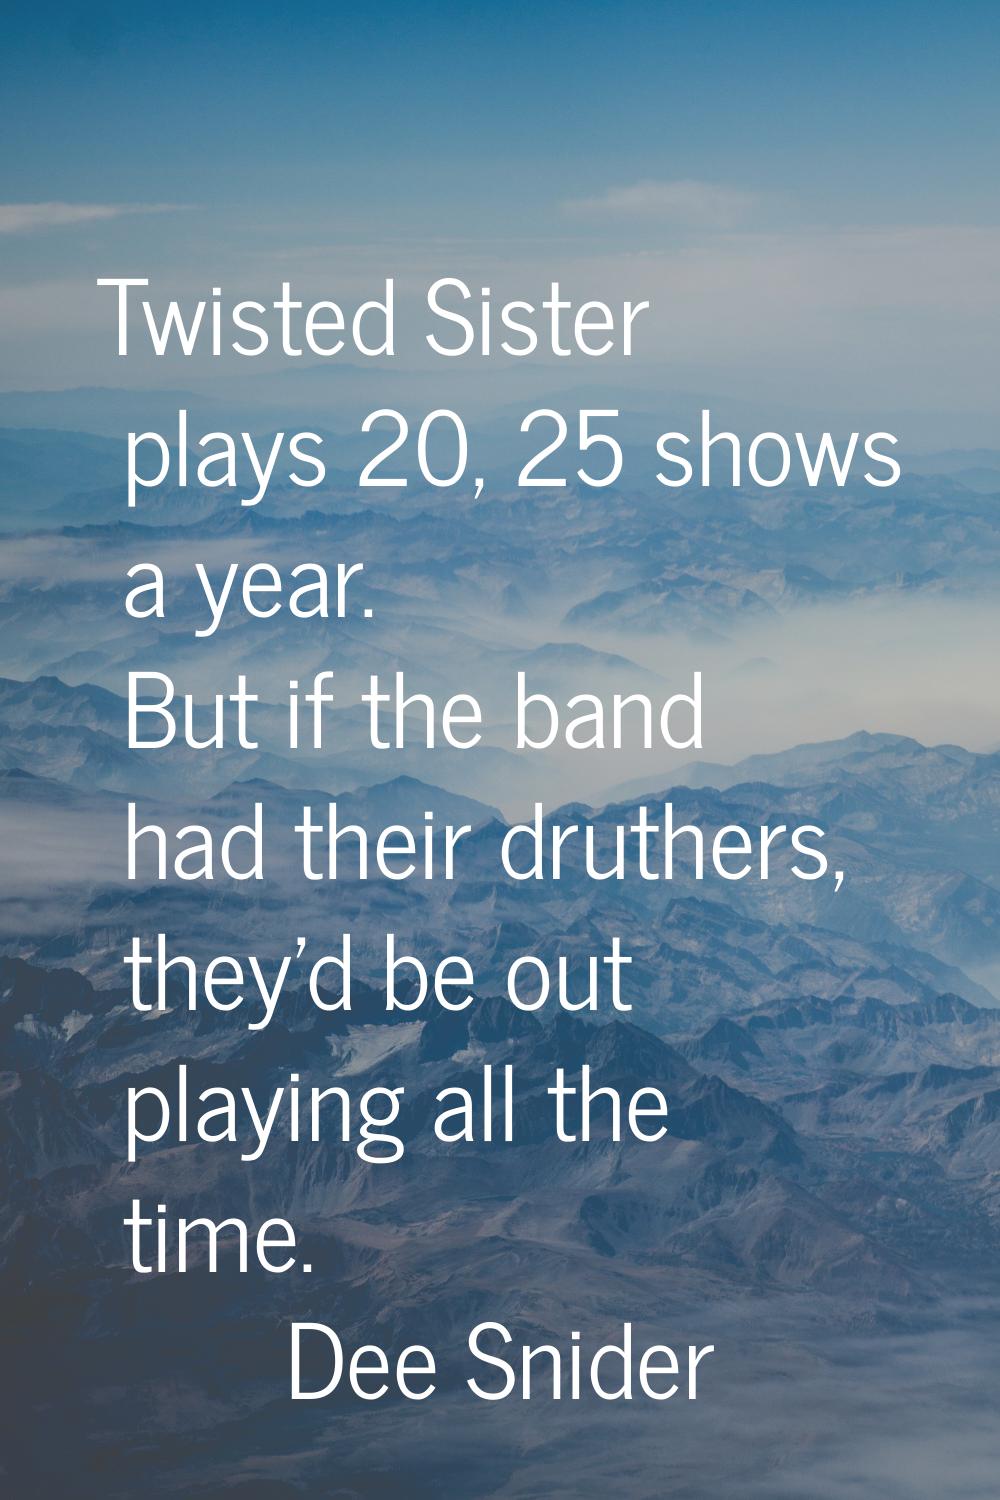 Twisted Sister plays 20, 25 shows a year. But if the band had their druthers, they'd be out playing